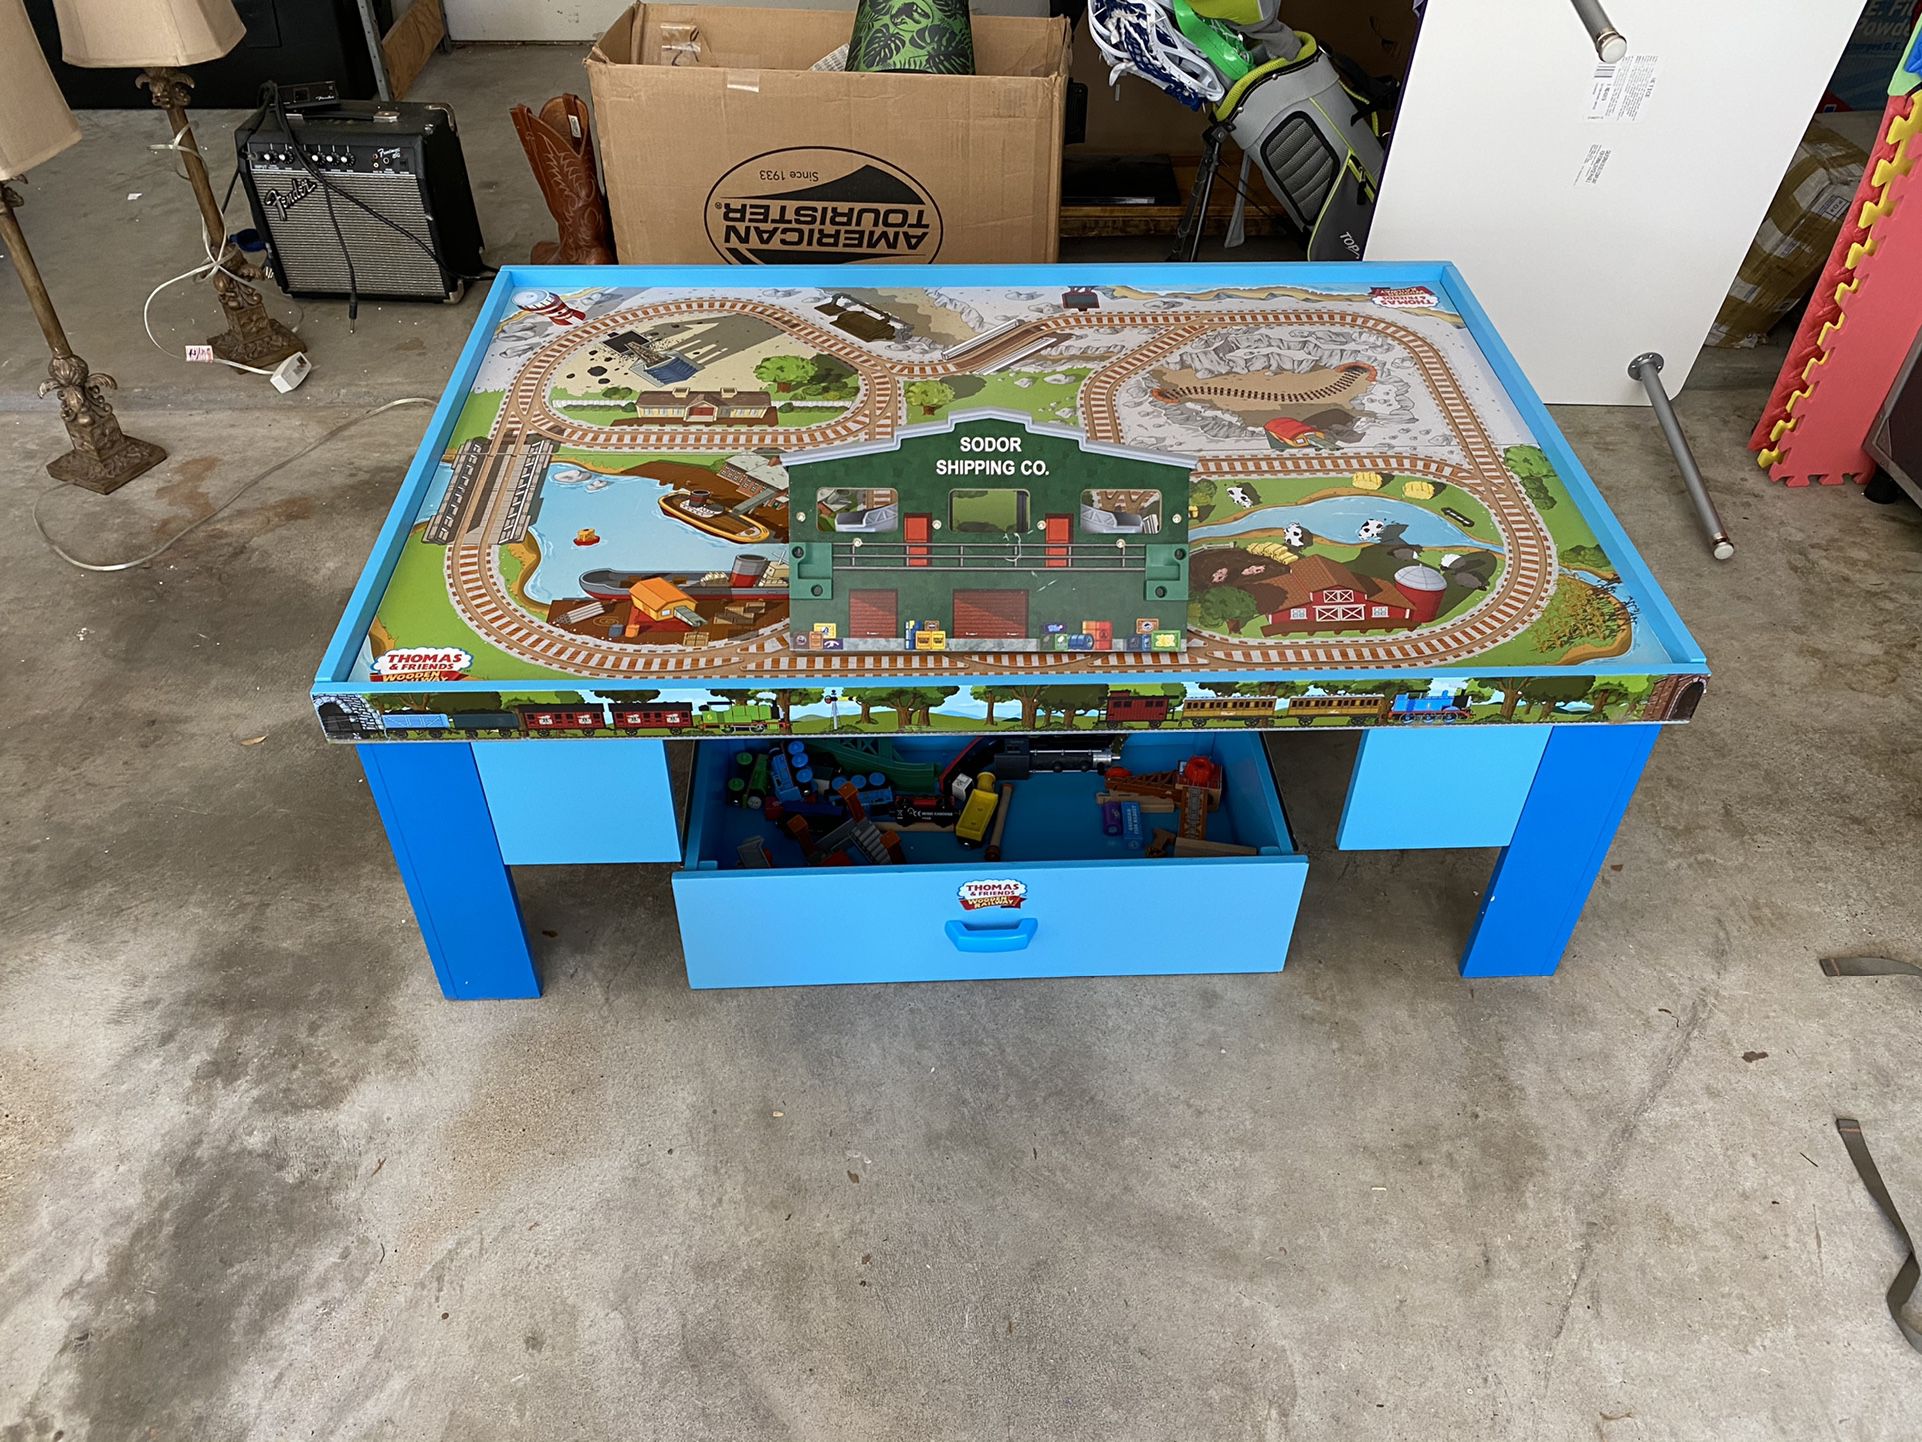 Thomas & Friends Railway Train Table with Trains